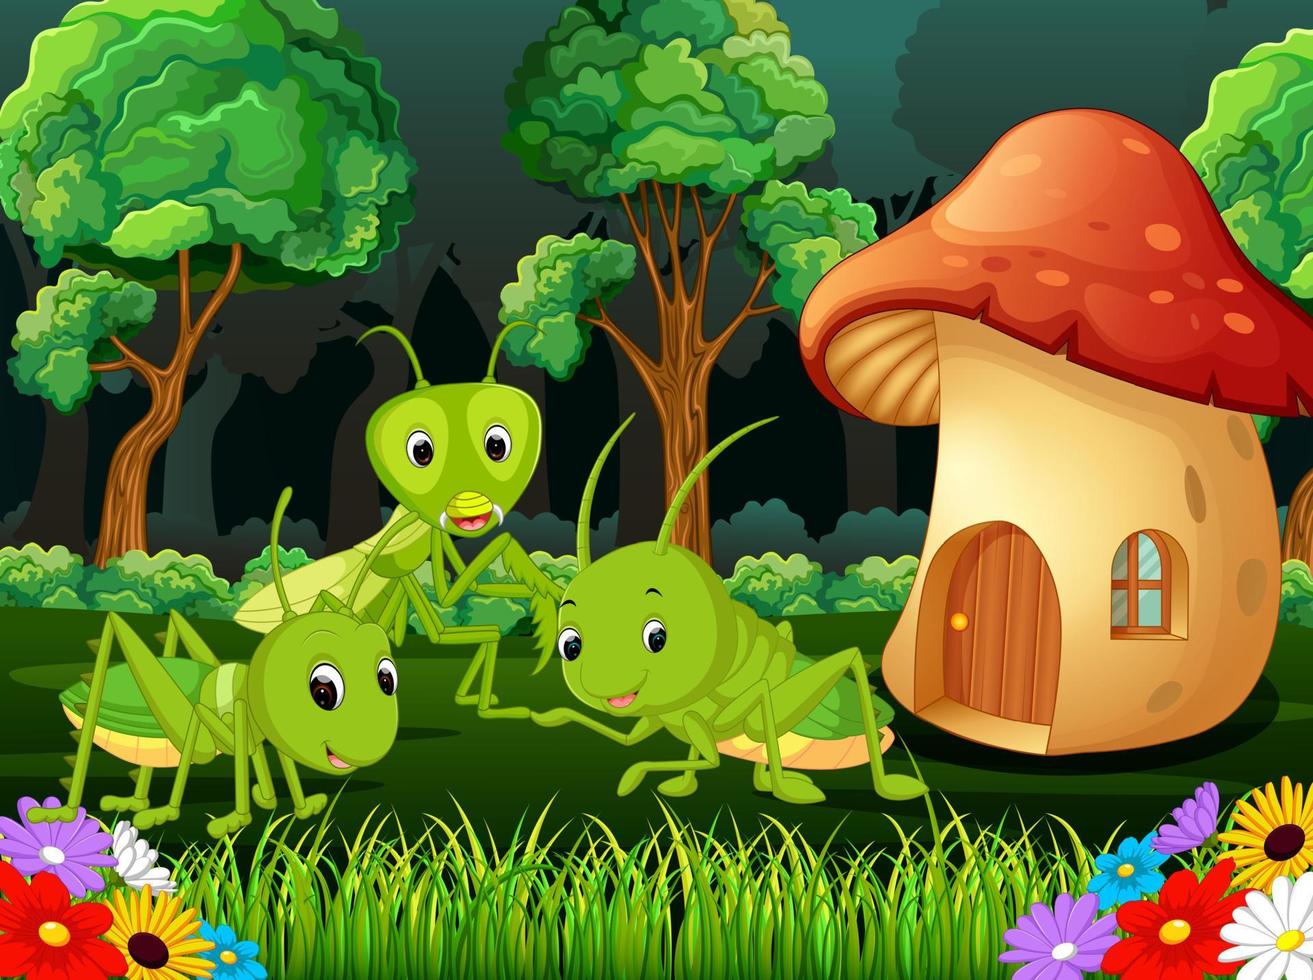 many grasshopper and a mushroom house in forest vector